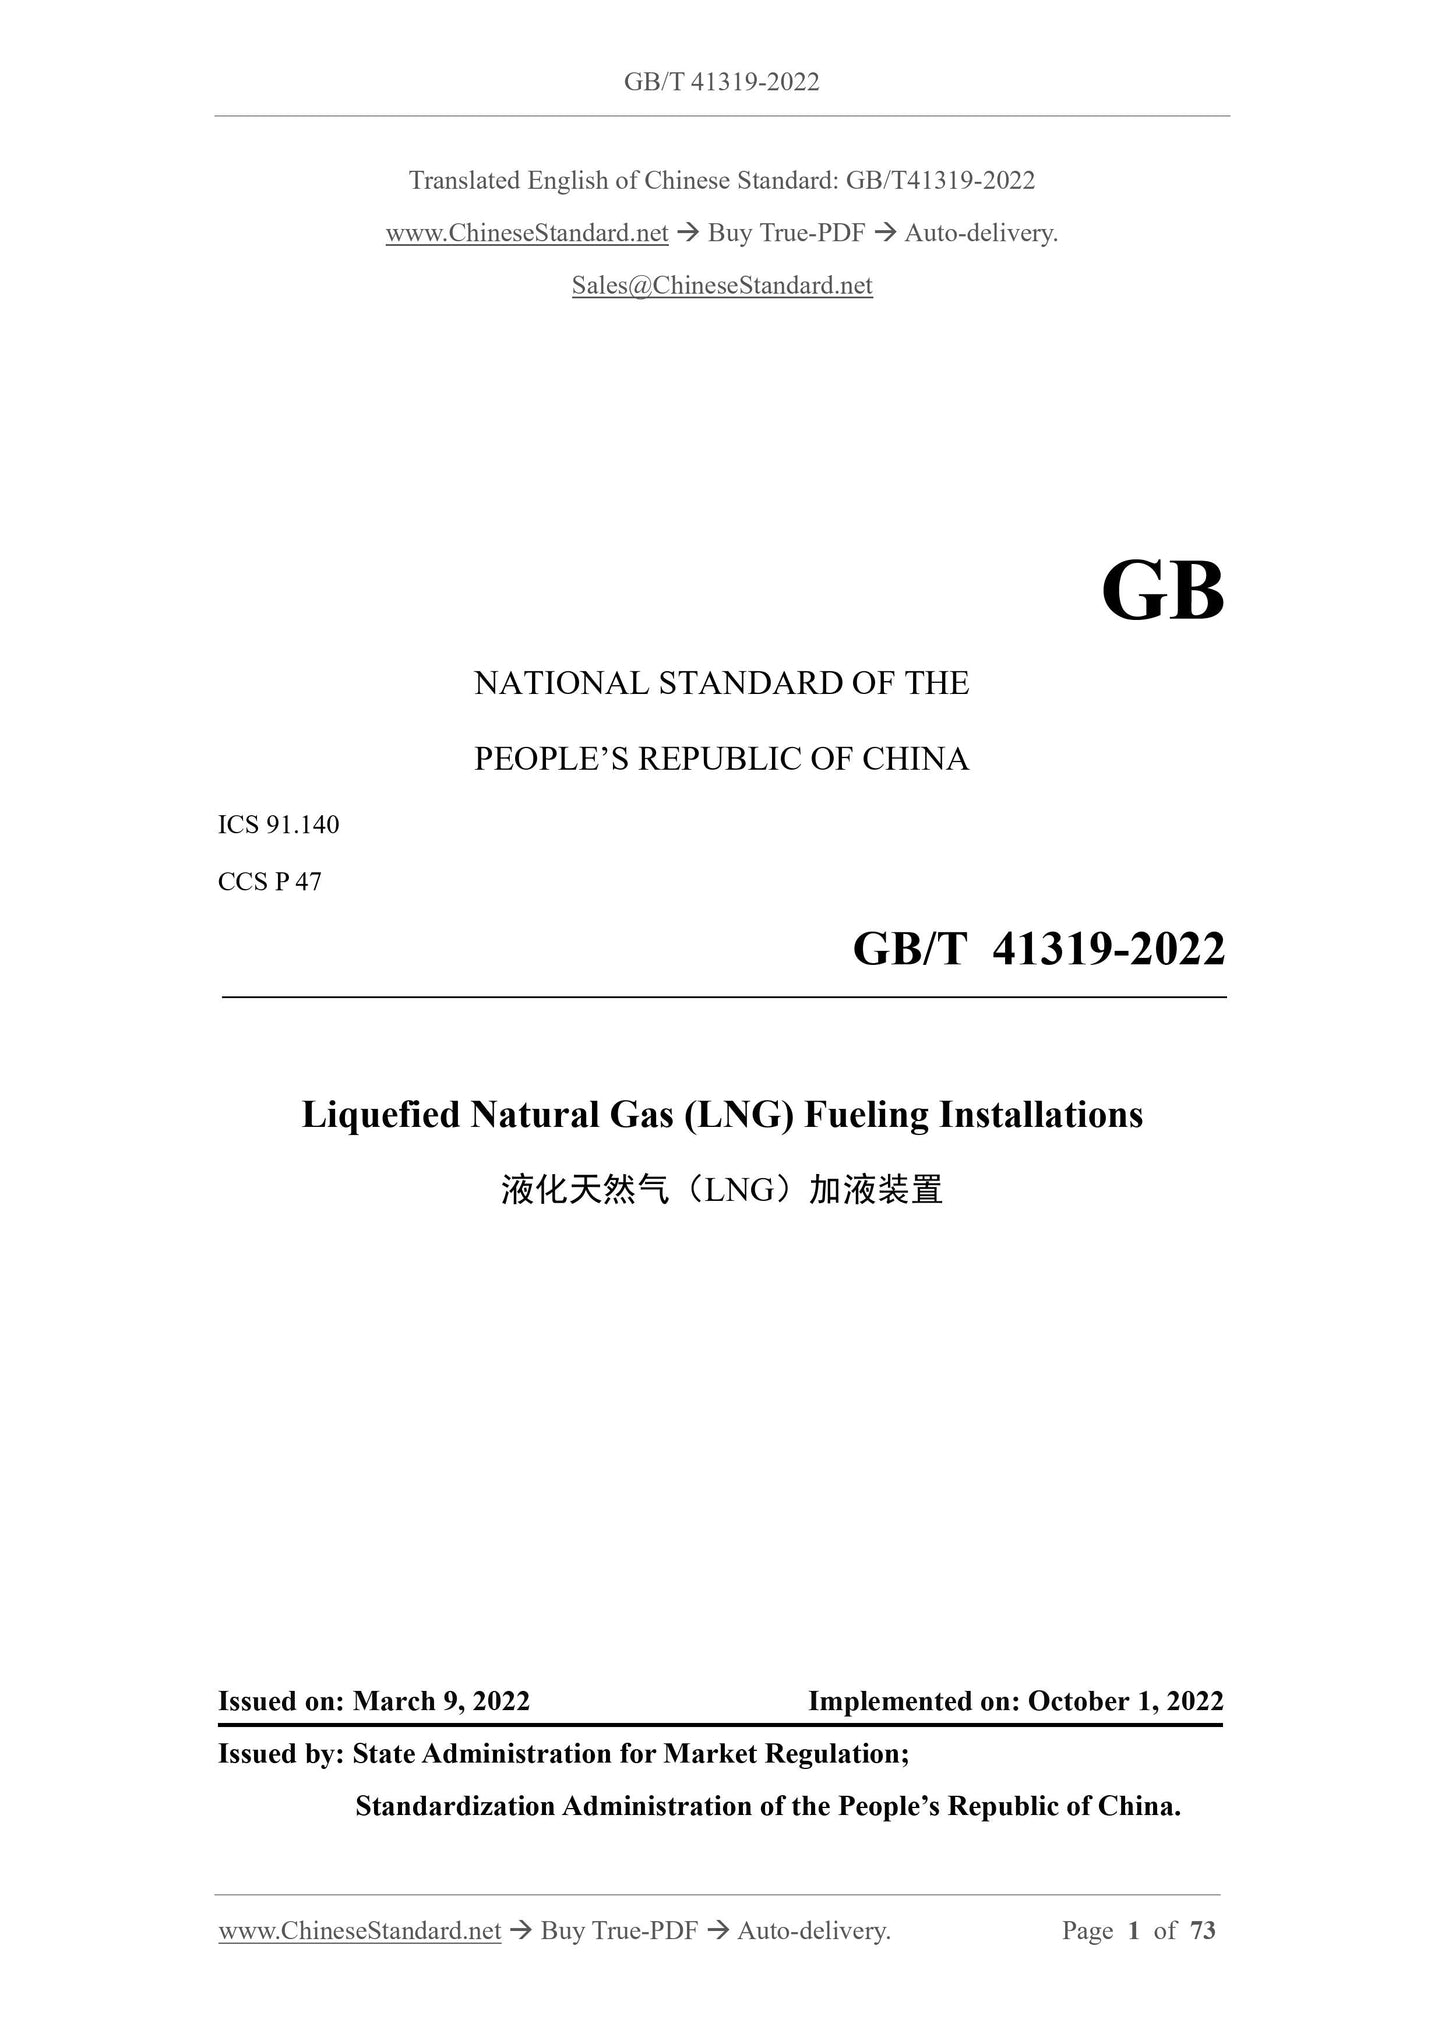 GB/T 41319-2022 Page 1